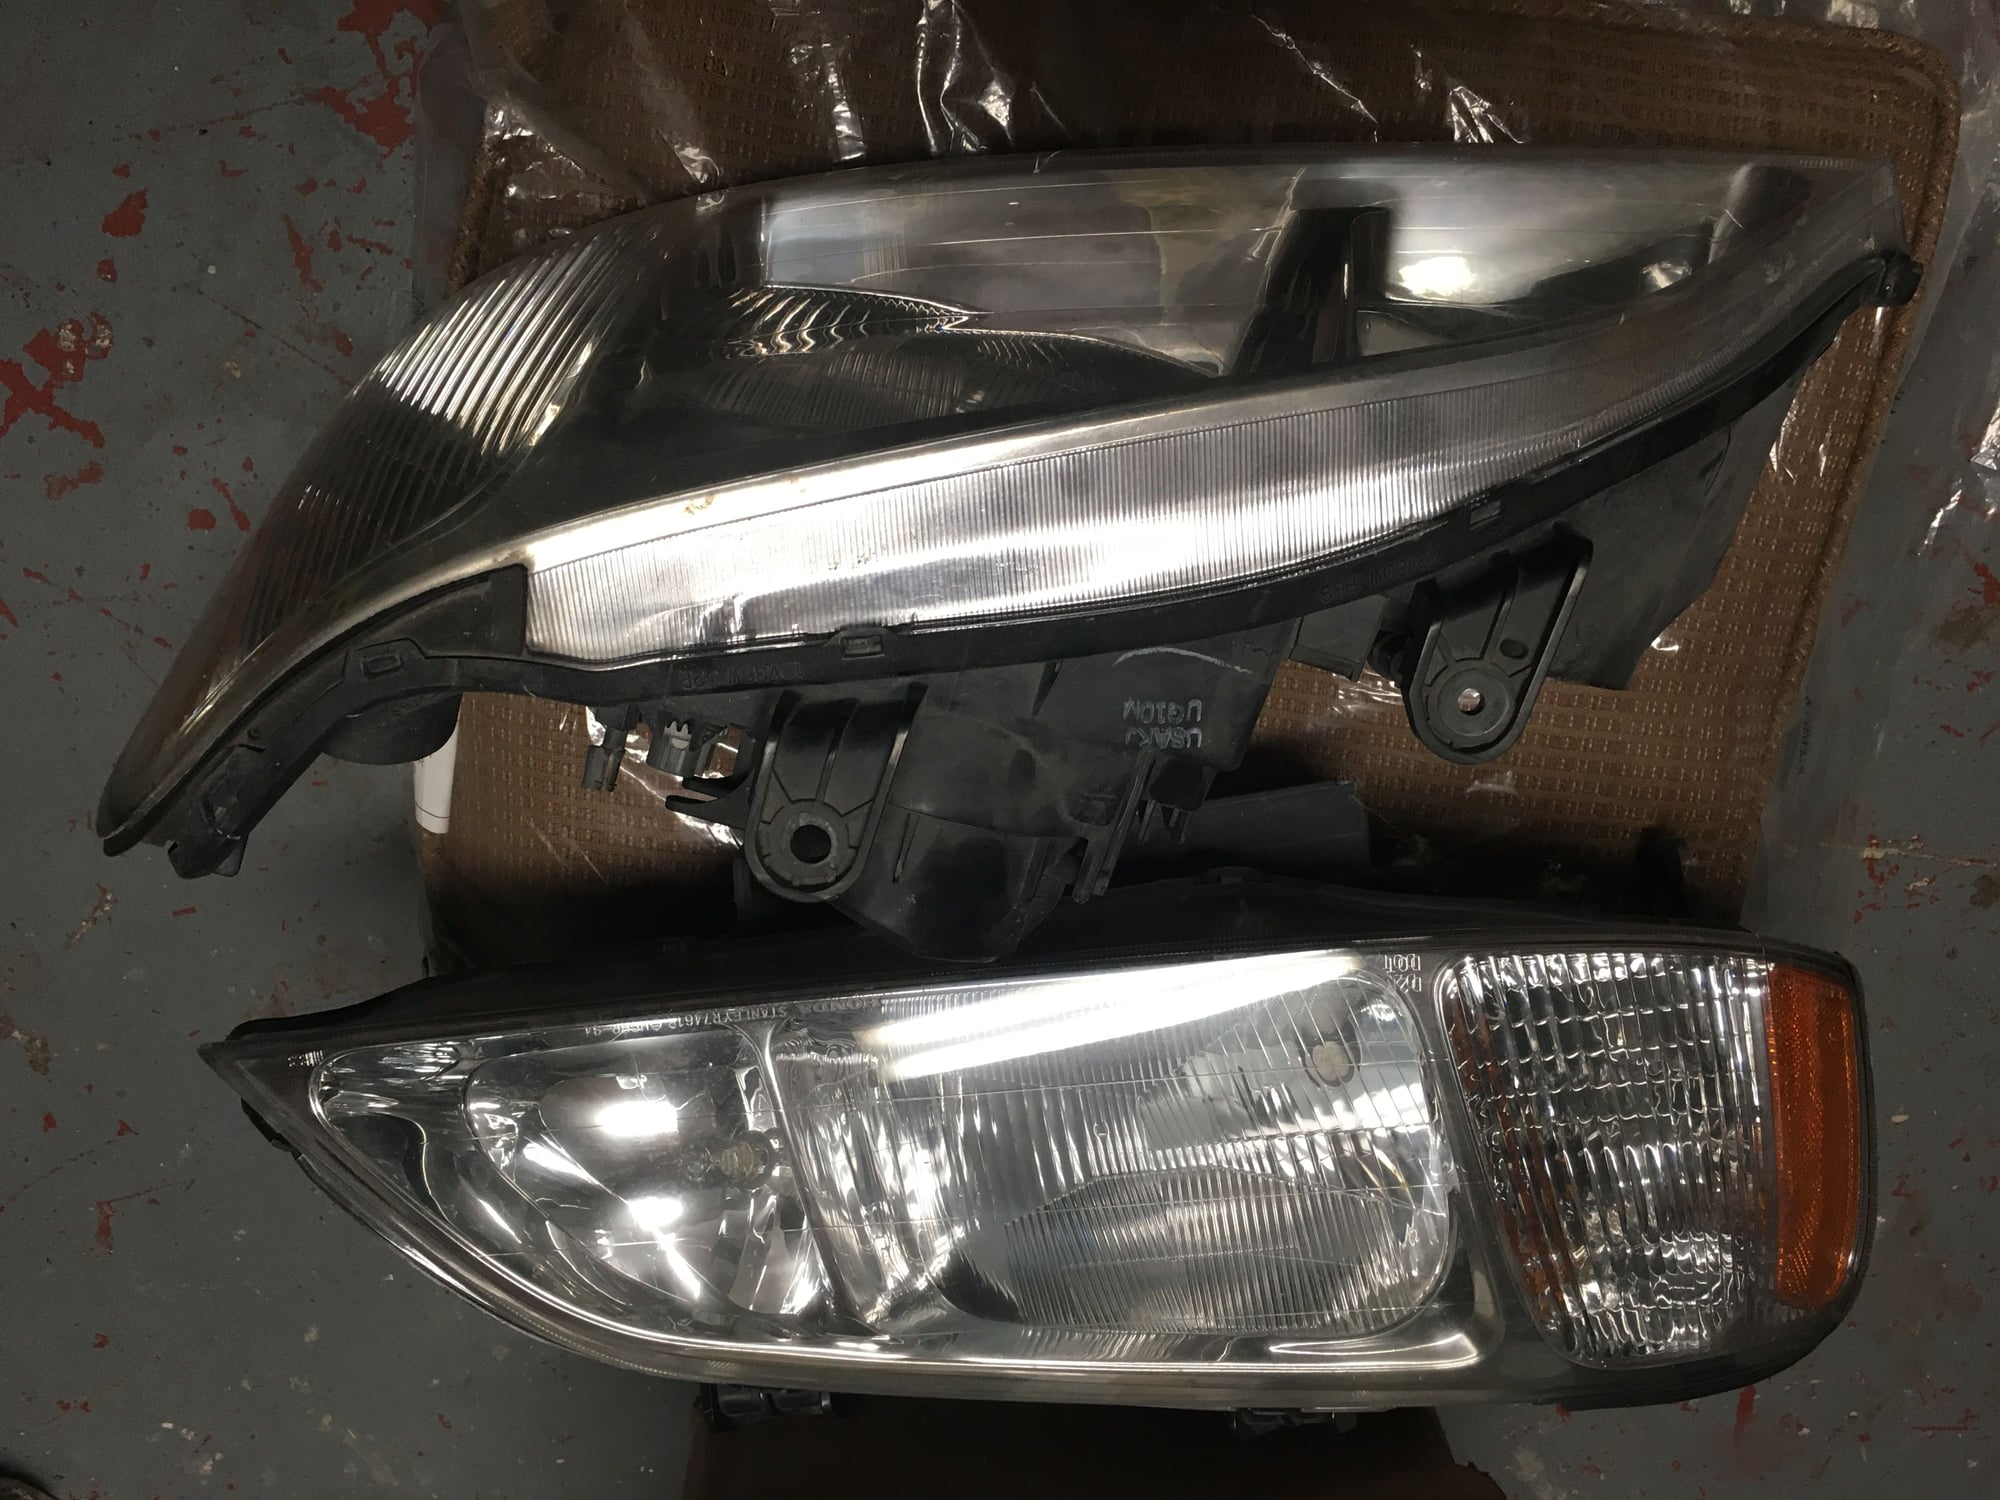 Exterior Body Parts - FS: 1999-2001 JDM Front Clip - Used - 1999 to 2001 Acura TL - Milwaukee, WI 53216, United States